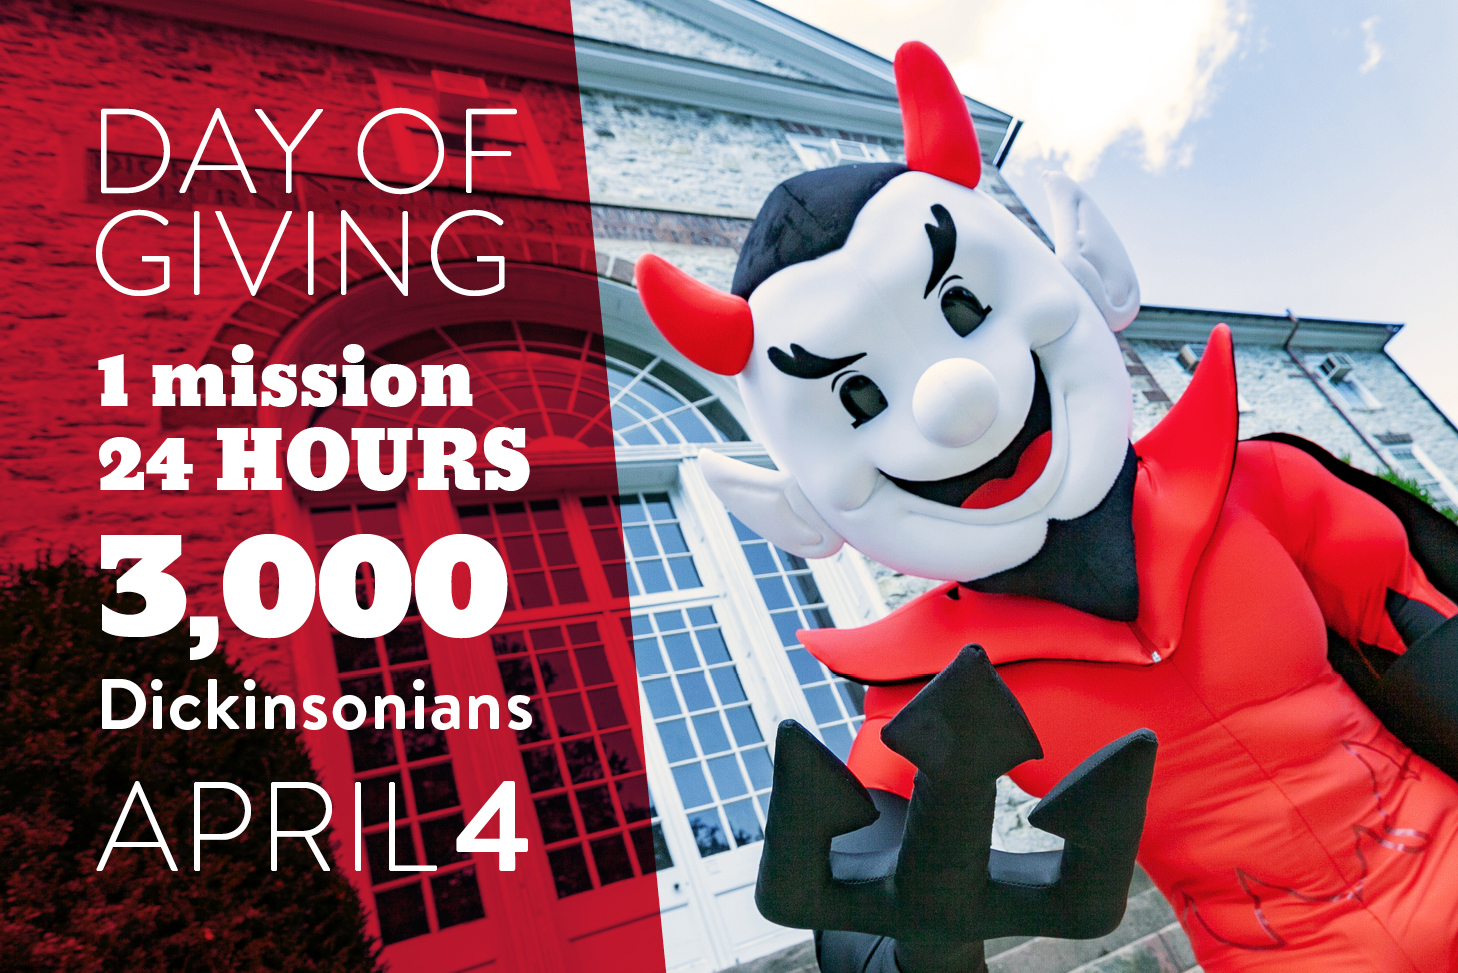 Day of Giving, 1 Mission, 24 Hours, 3,000 Dickinsonians, April 4